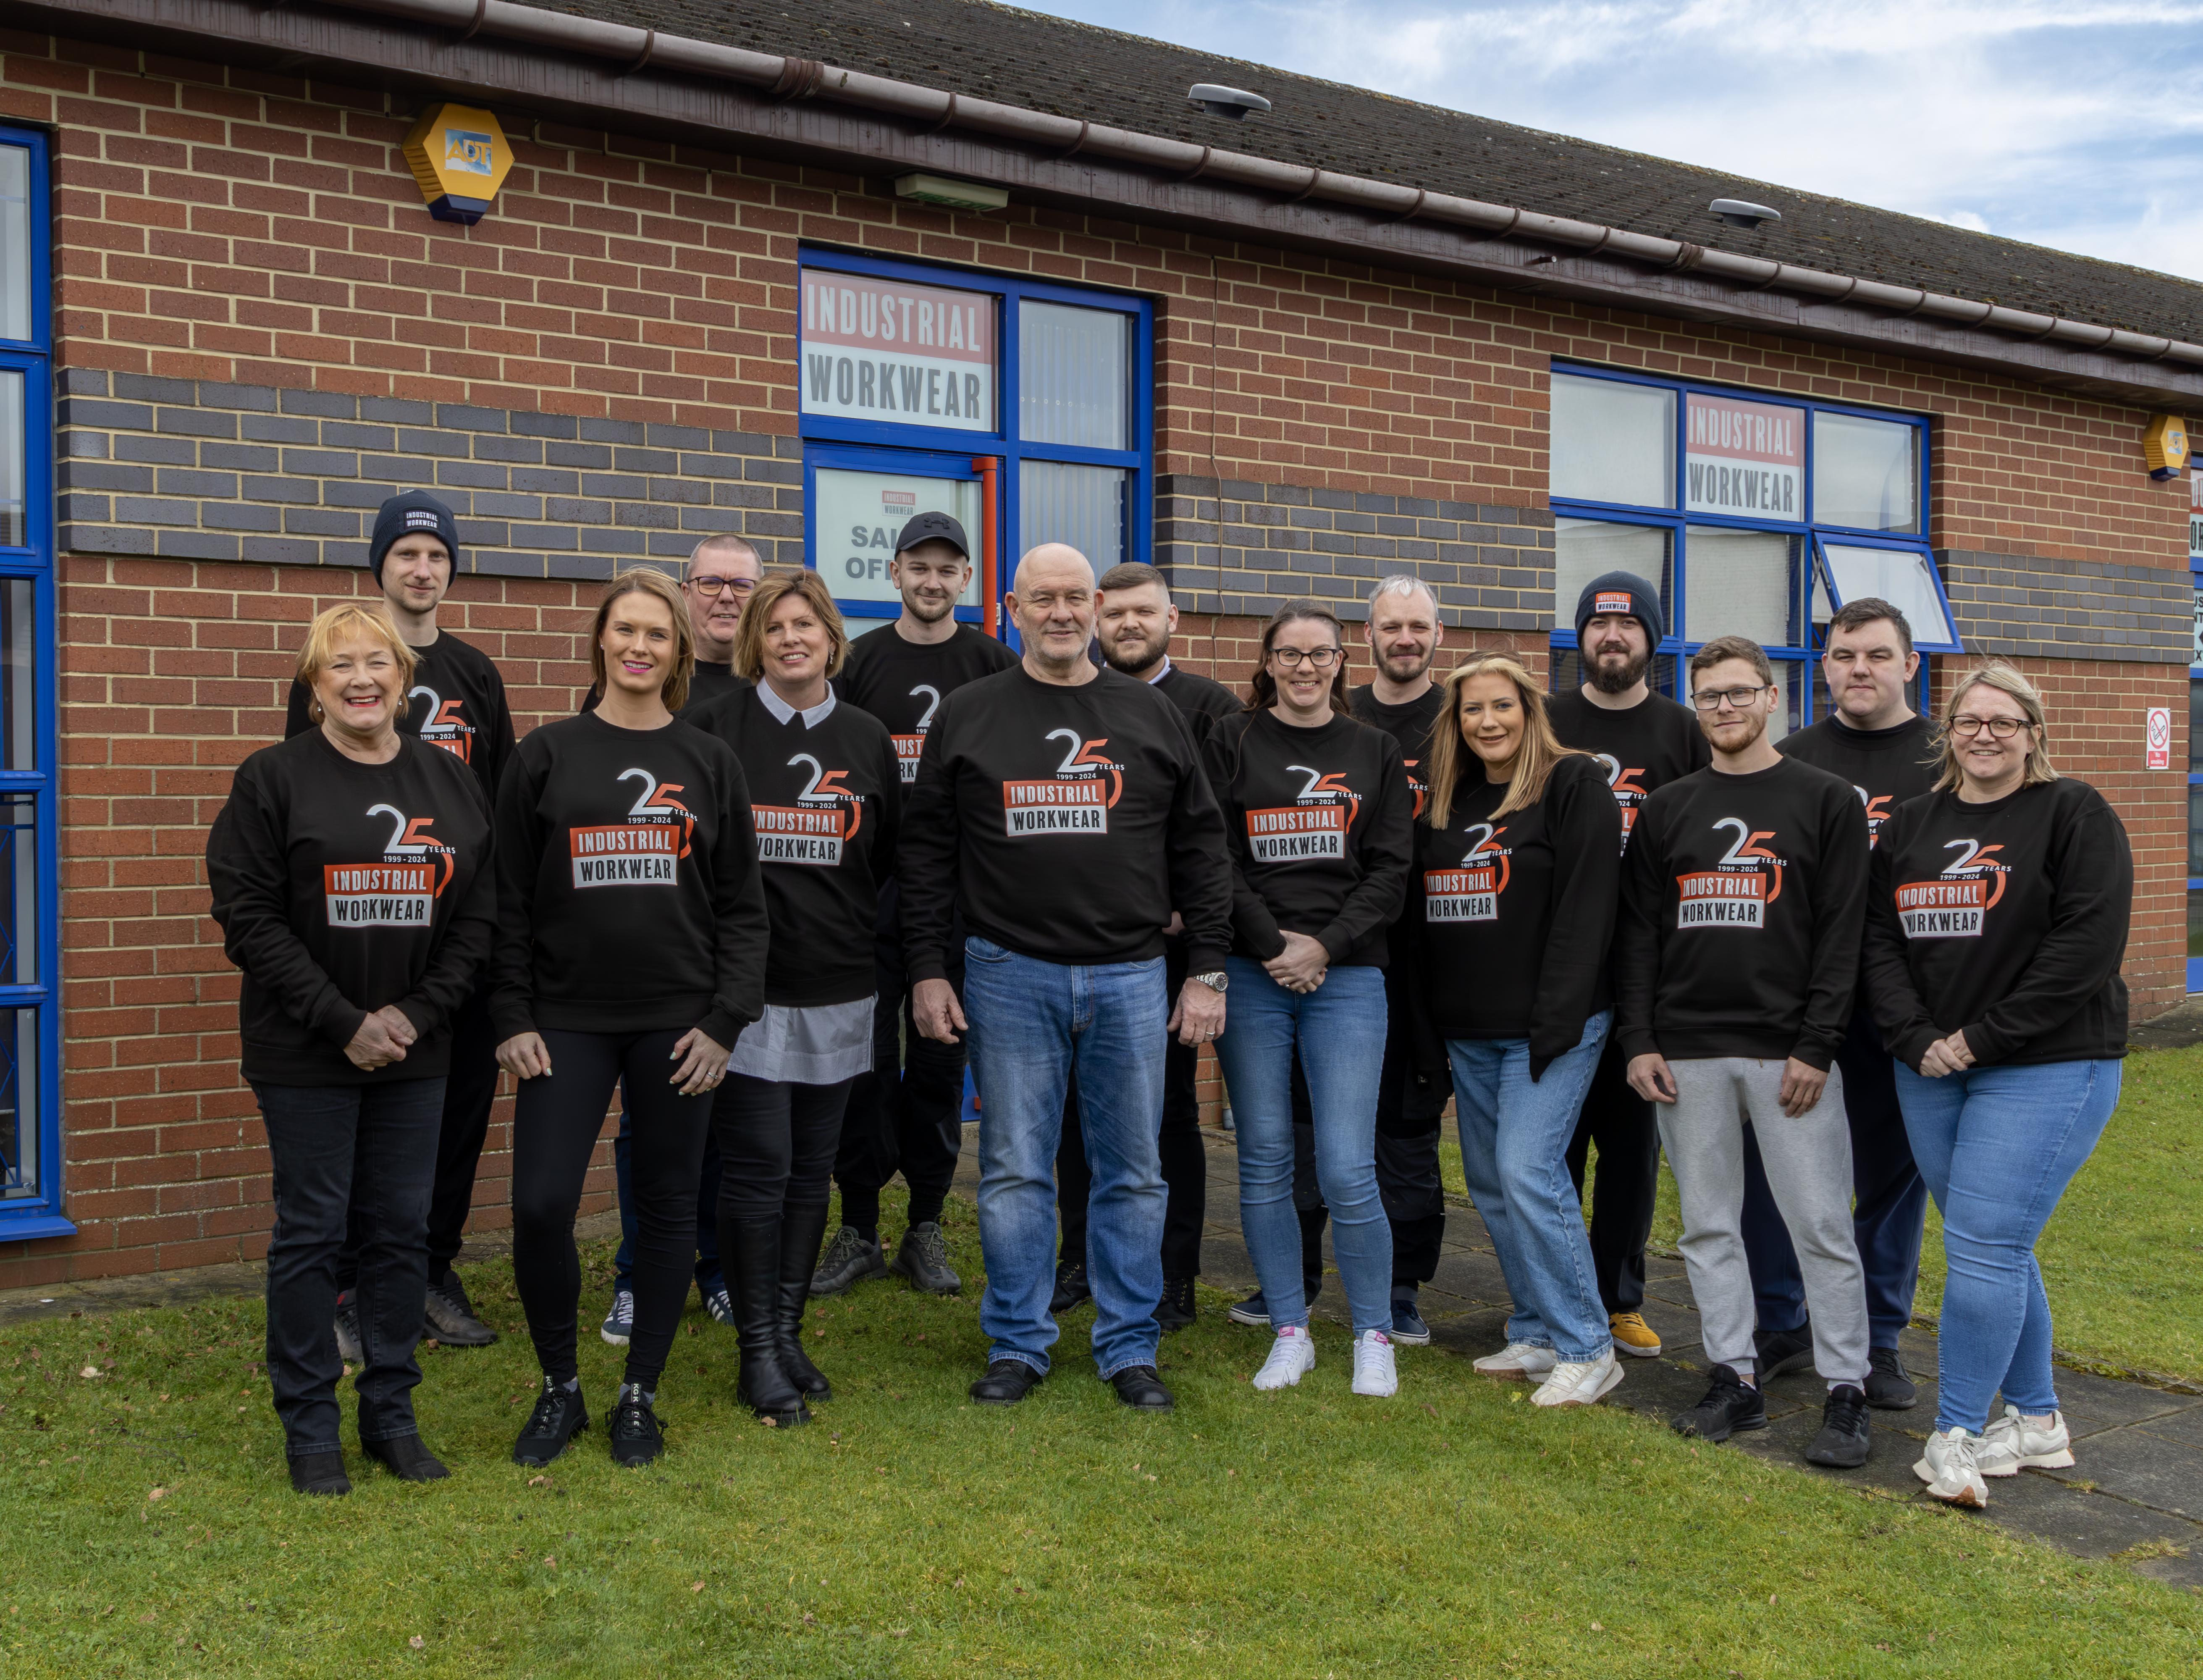 Celebrating 25 Years of Excellence: Industrial Workwear Limited’s Journey